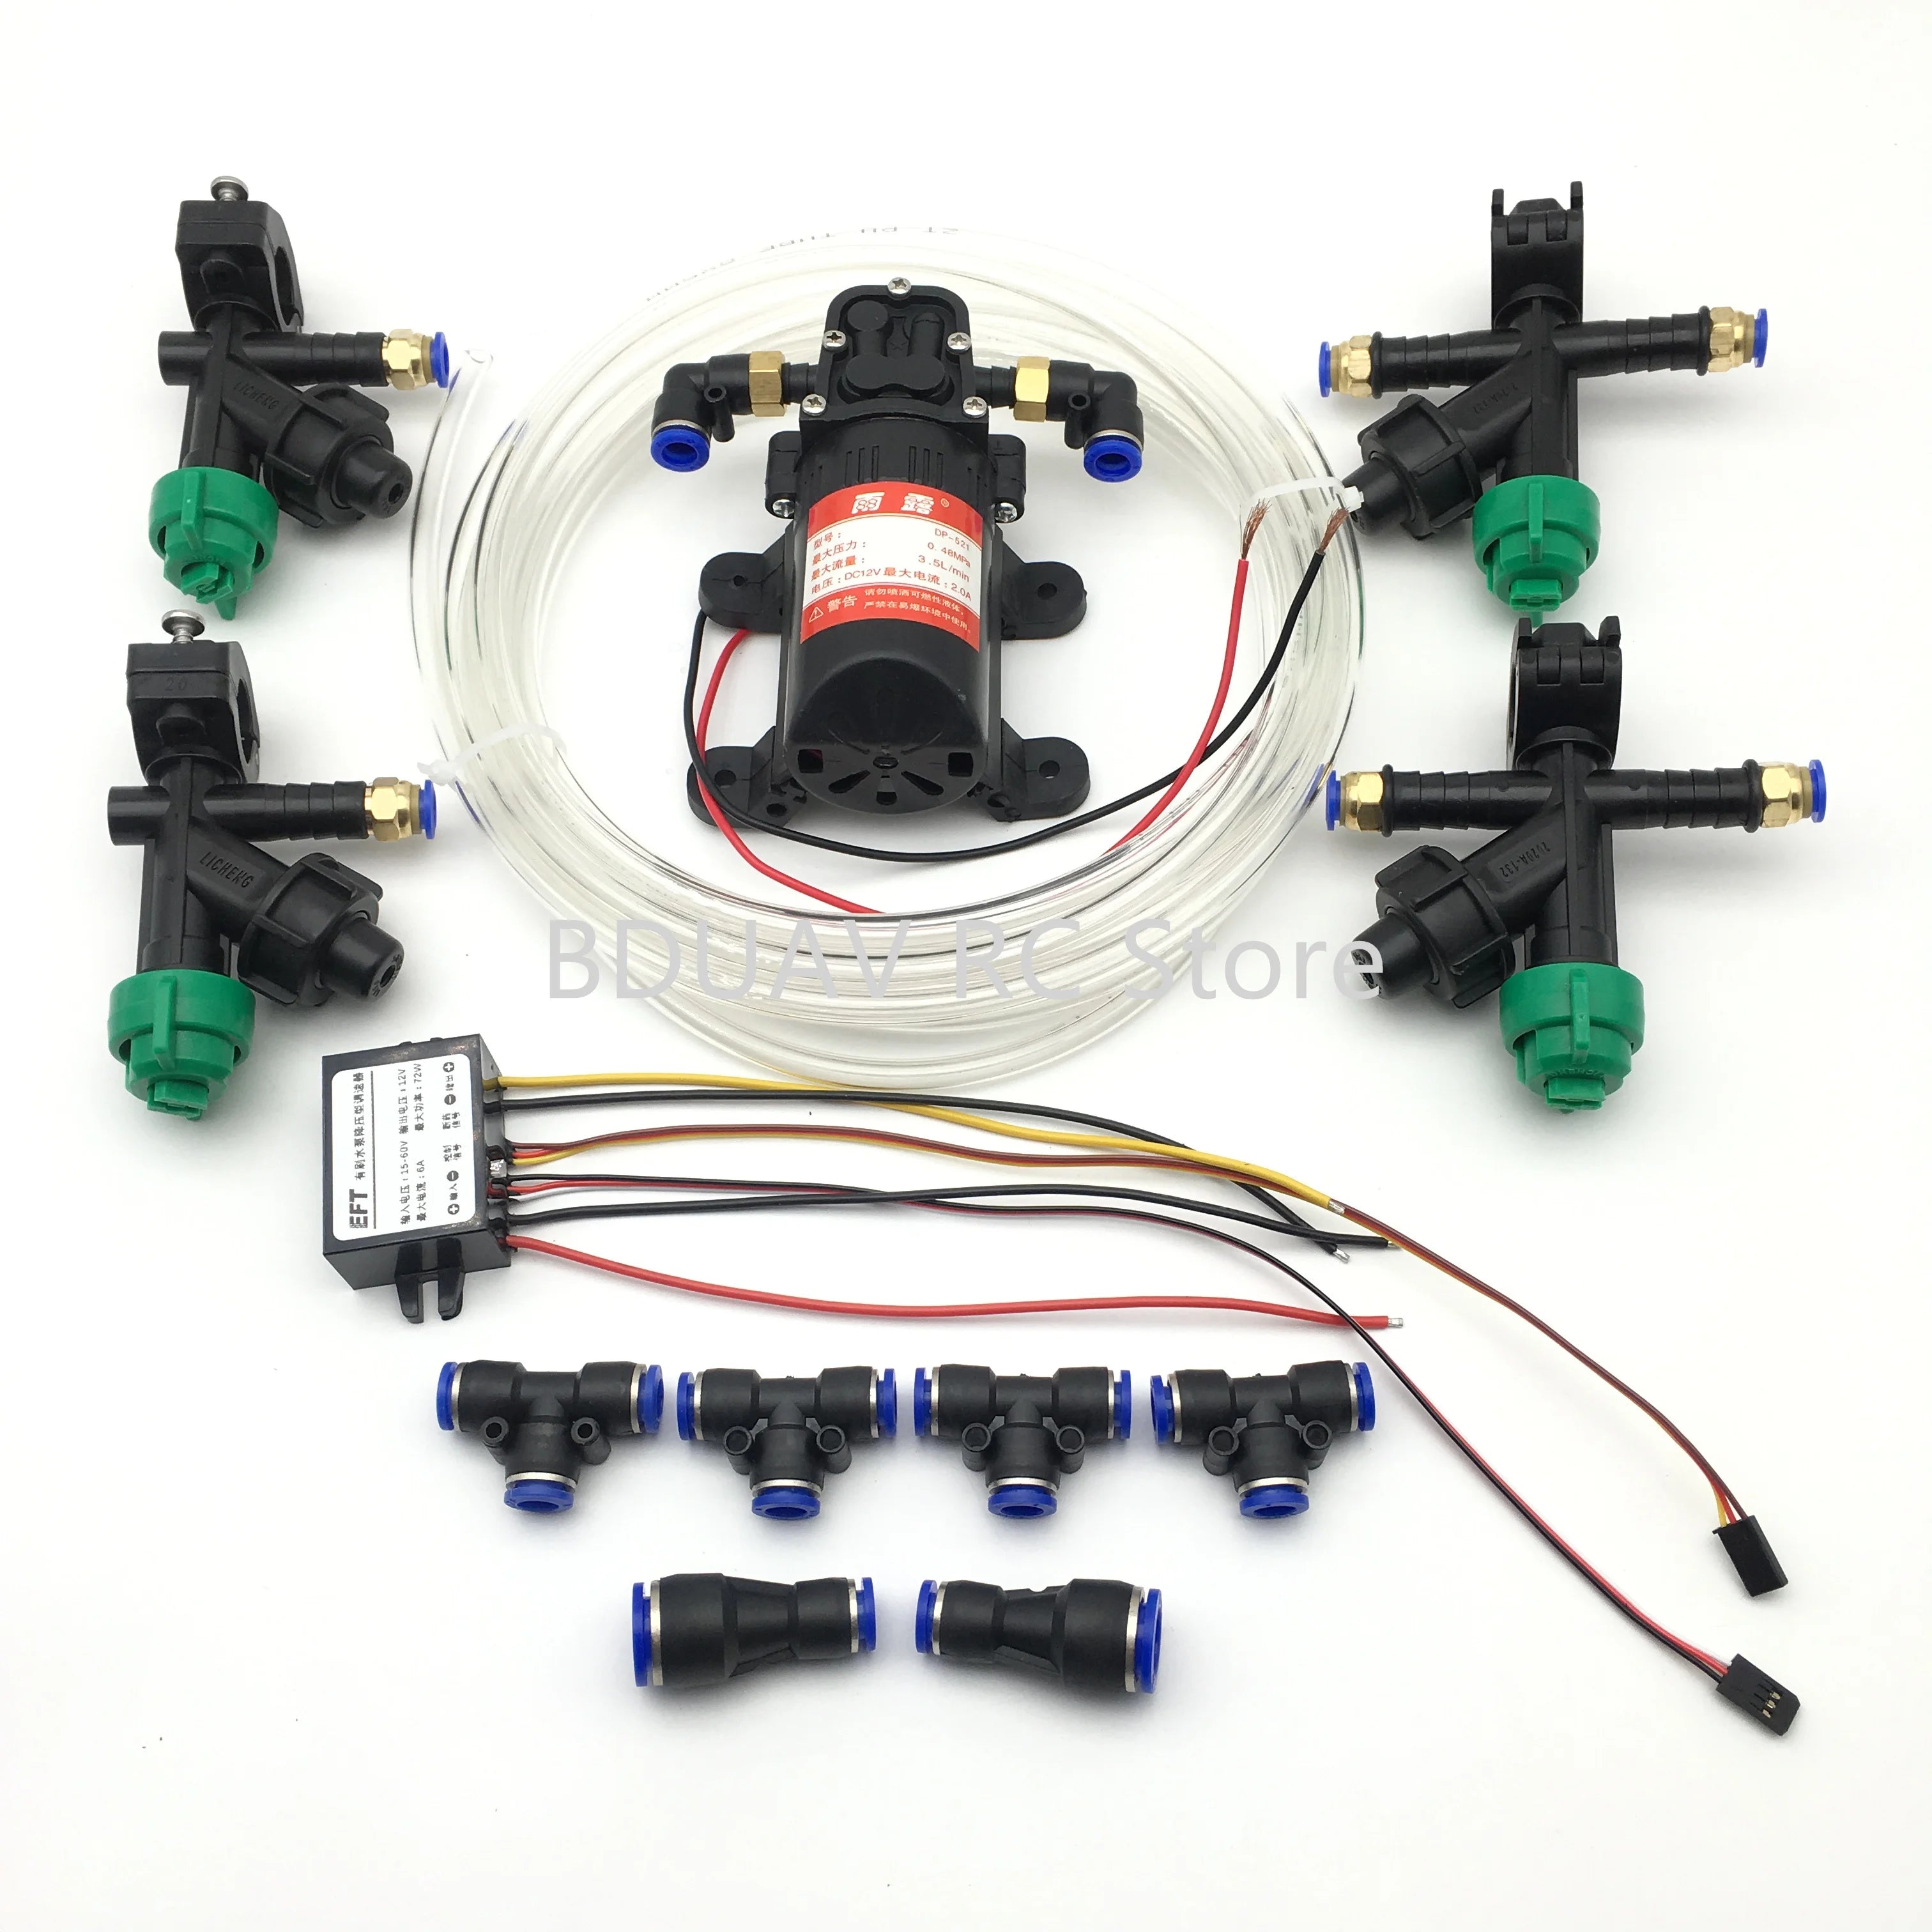 DIY Agricultural drone spray system SPECIFICATIONS Wheelbase : Bottom Plate Use